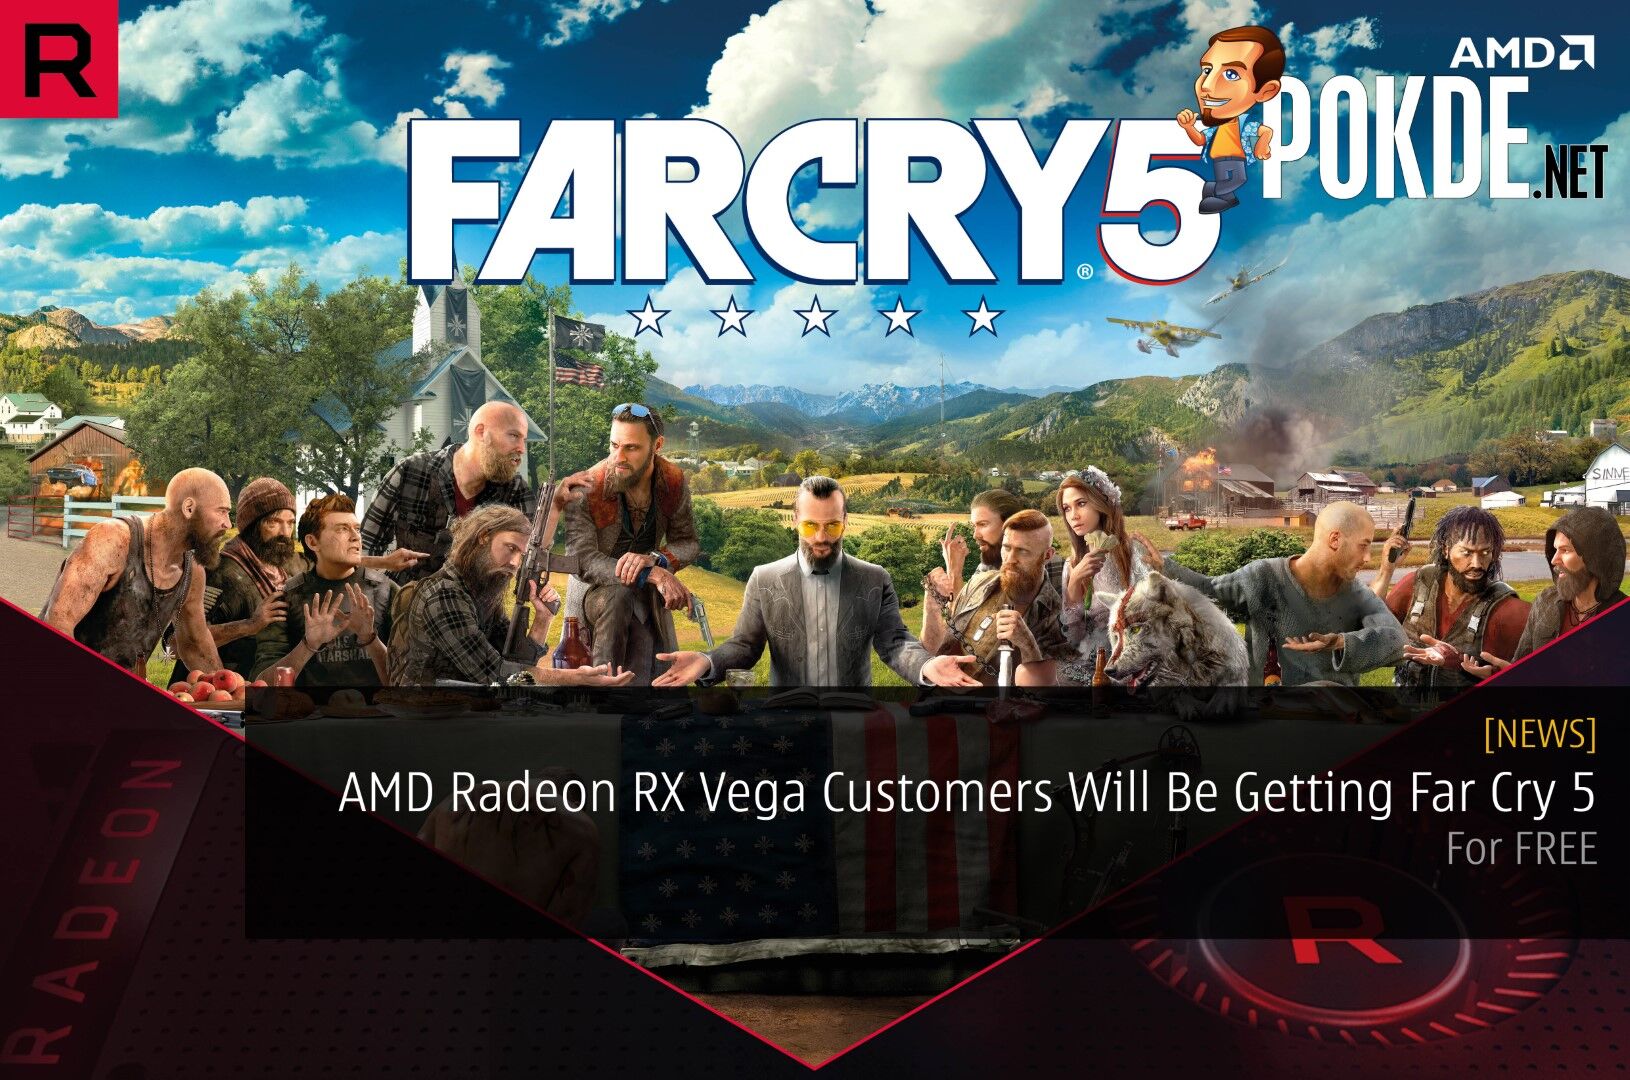 AMD Radeon RX Vega Customers Will Be Getting Far Cry 5 For FREE 38